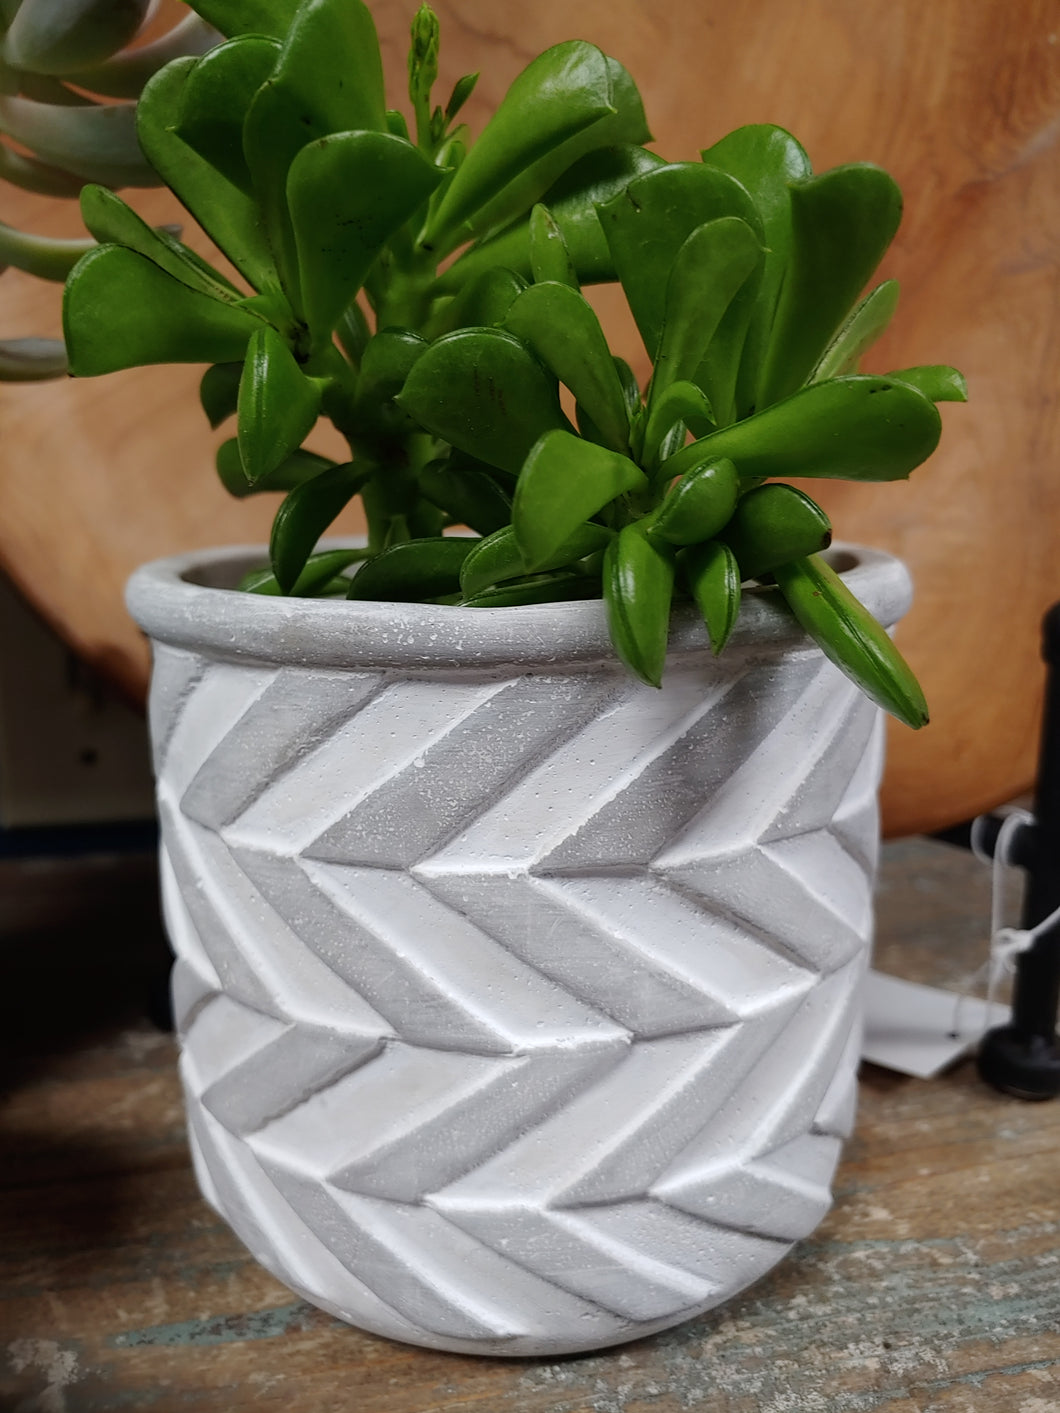 DARK AND LIGHT GREY, HEAVY-DUTY CEMENT PLANTER WITH SUCCULENTS, WITH A CHEVRON DESIGN EXTERIOR. 5